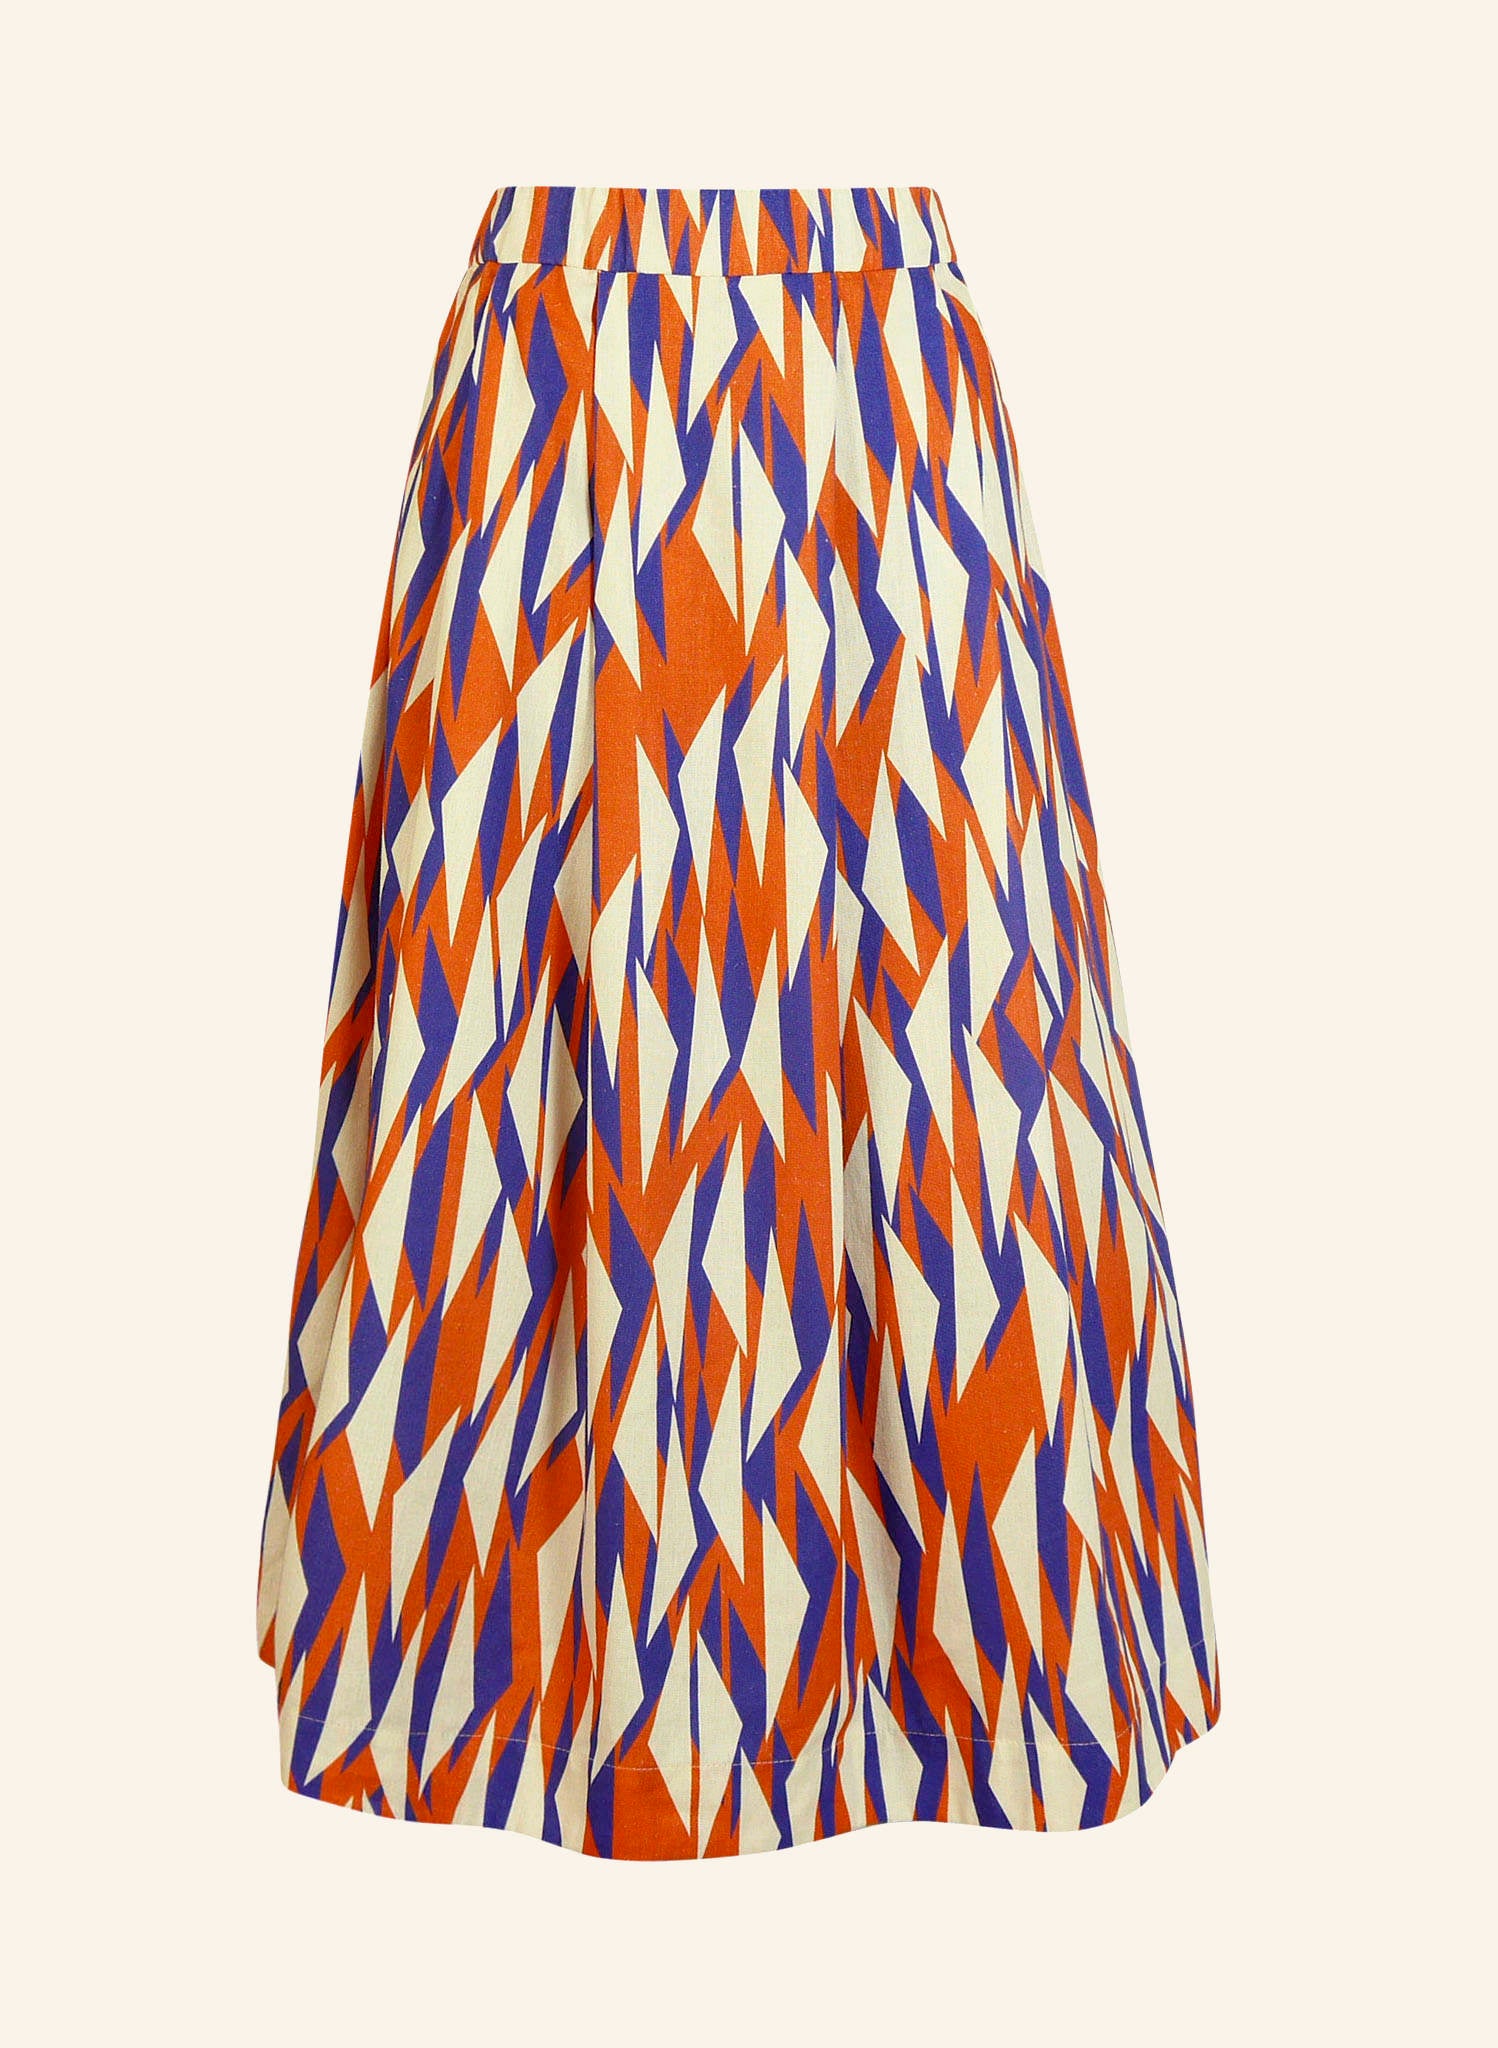 Red & Blue Tigerfish Midi Skirt | Cotton & Linen | Made in UK